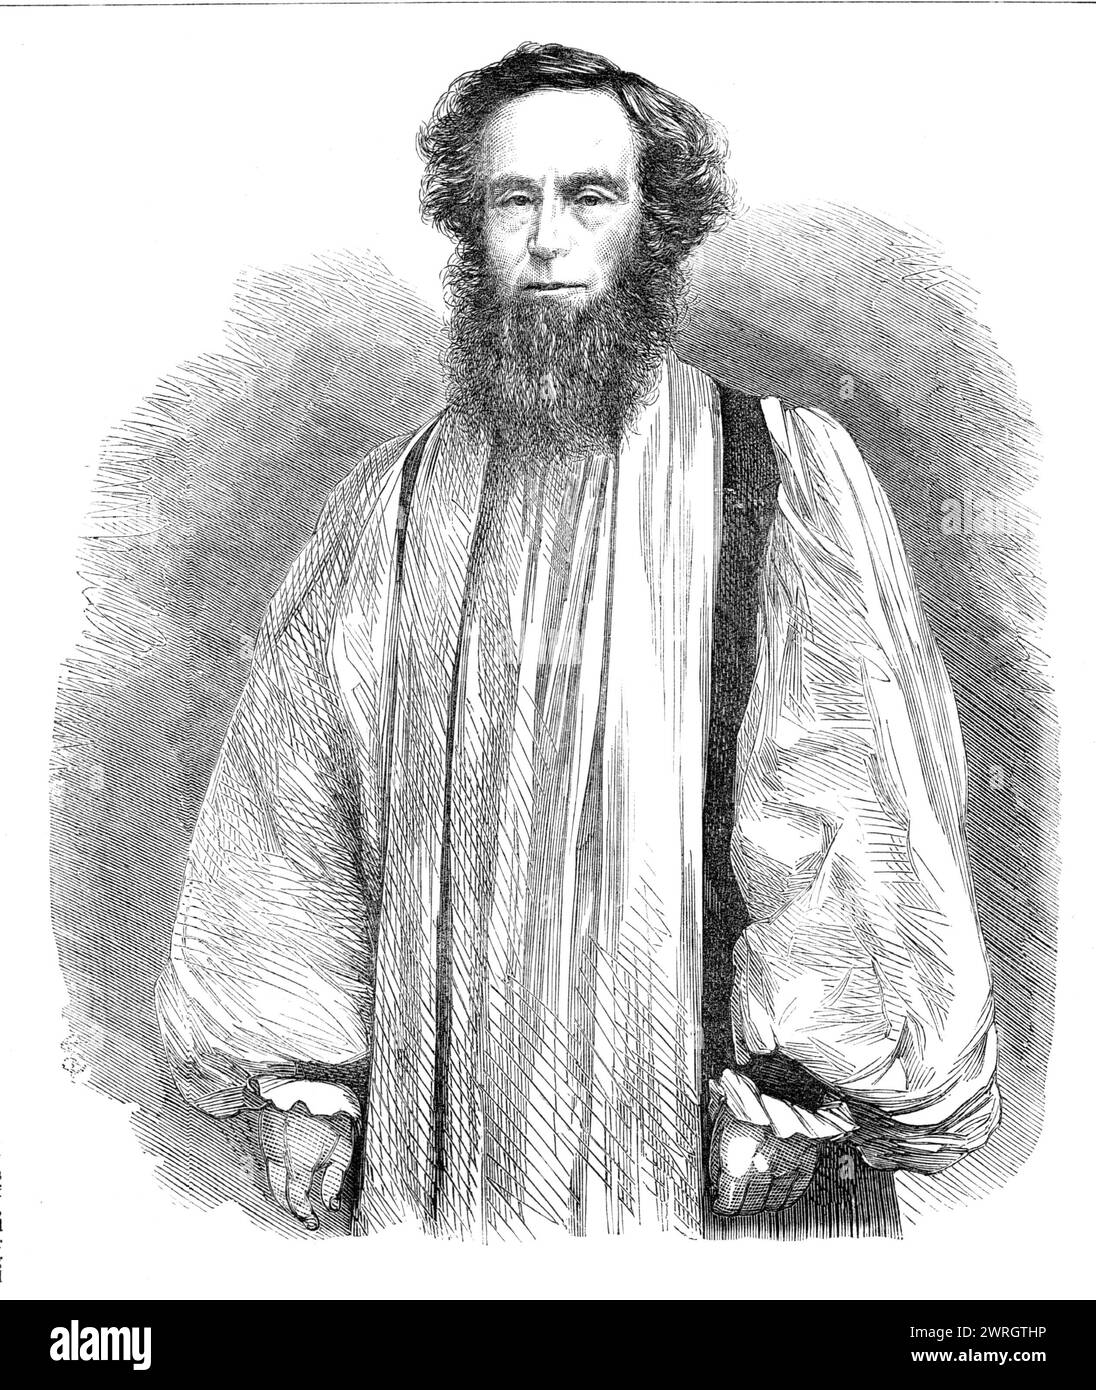 The Right Rev. Dr Bromby, the new Bishop of Tasmania, 1864. Dr. Bromby...was consecrated in Canterbury Cathedral on the 29th of June last...[He] was introduced on that occasion by Bishop Nixon, his predecessor in the see of Tasmania, and by the Bishop of Gloucester and Bristol, whose diocese has been for some time past the scene of his labours as the Principal of the Church of England Normal Training College, at Cheltenham'. Charles Bromby was the last Colonial bishop to be nominated by the British crown. From &quot;Illustrated London News&quot;, 1864. Stock Photo